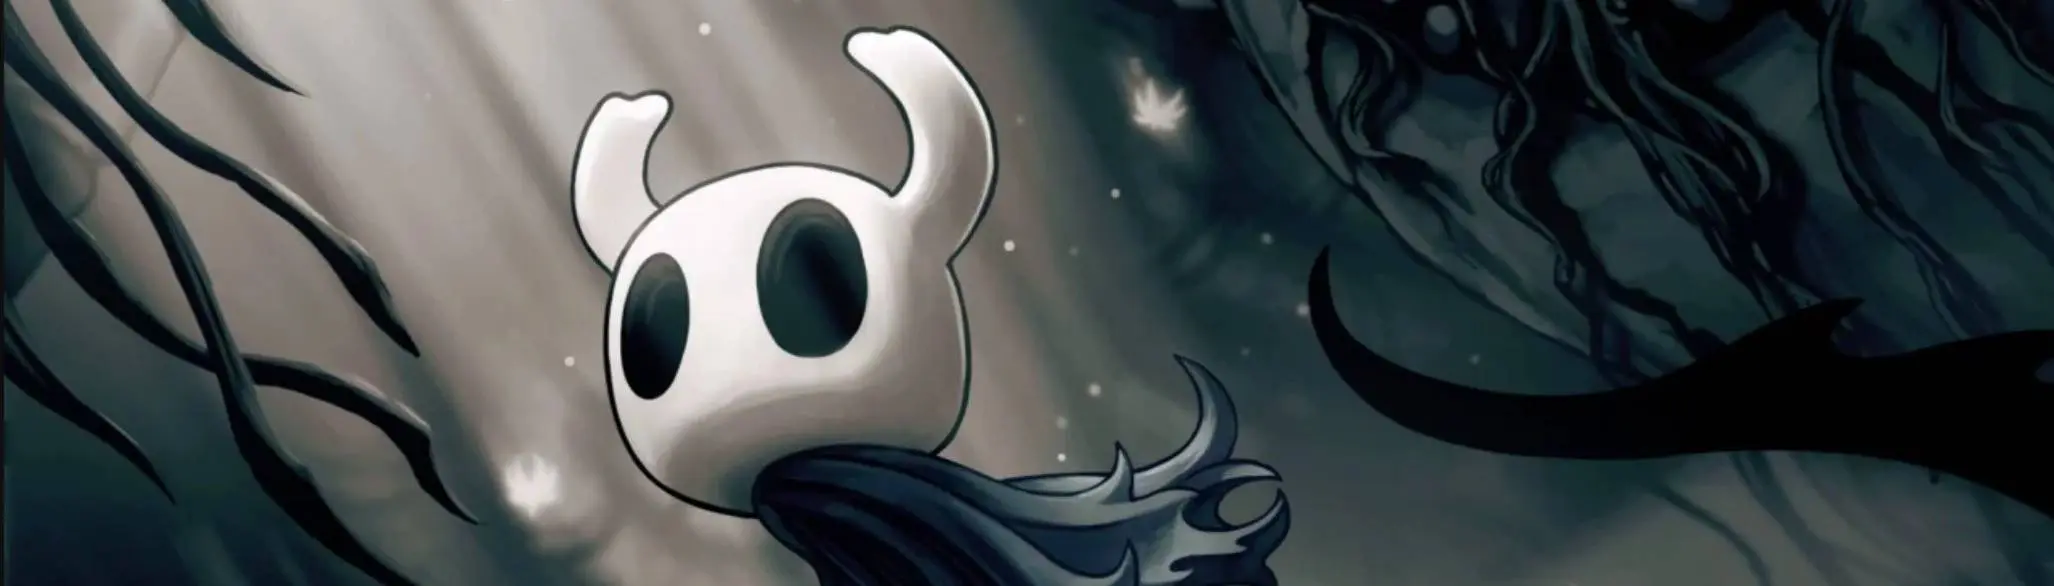 Hollow Knight Megapack U11 at Blade & Sorcery Nexus - Mods and community